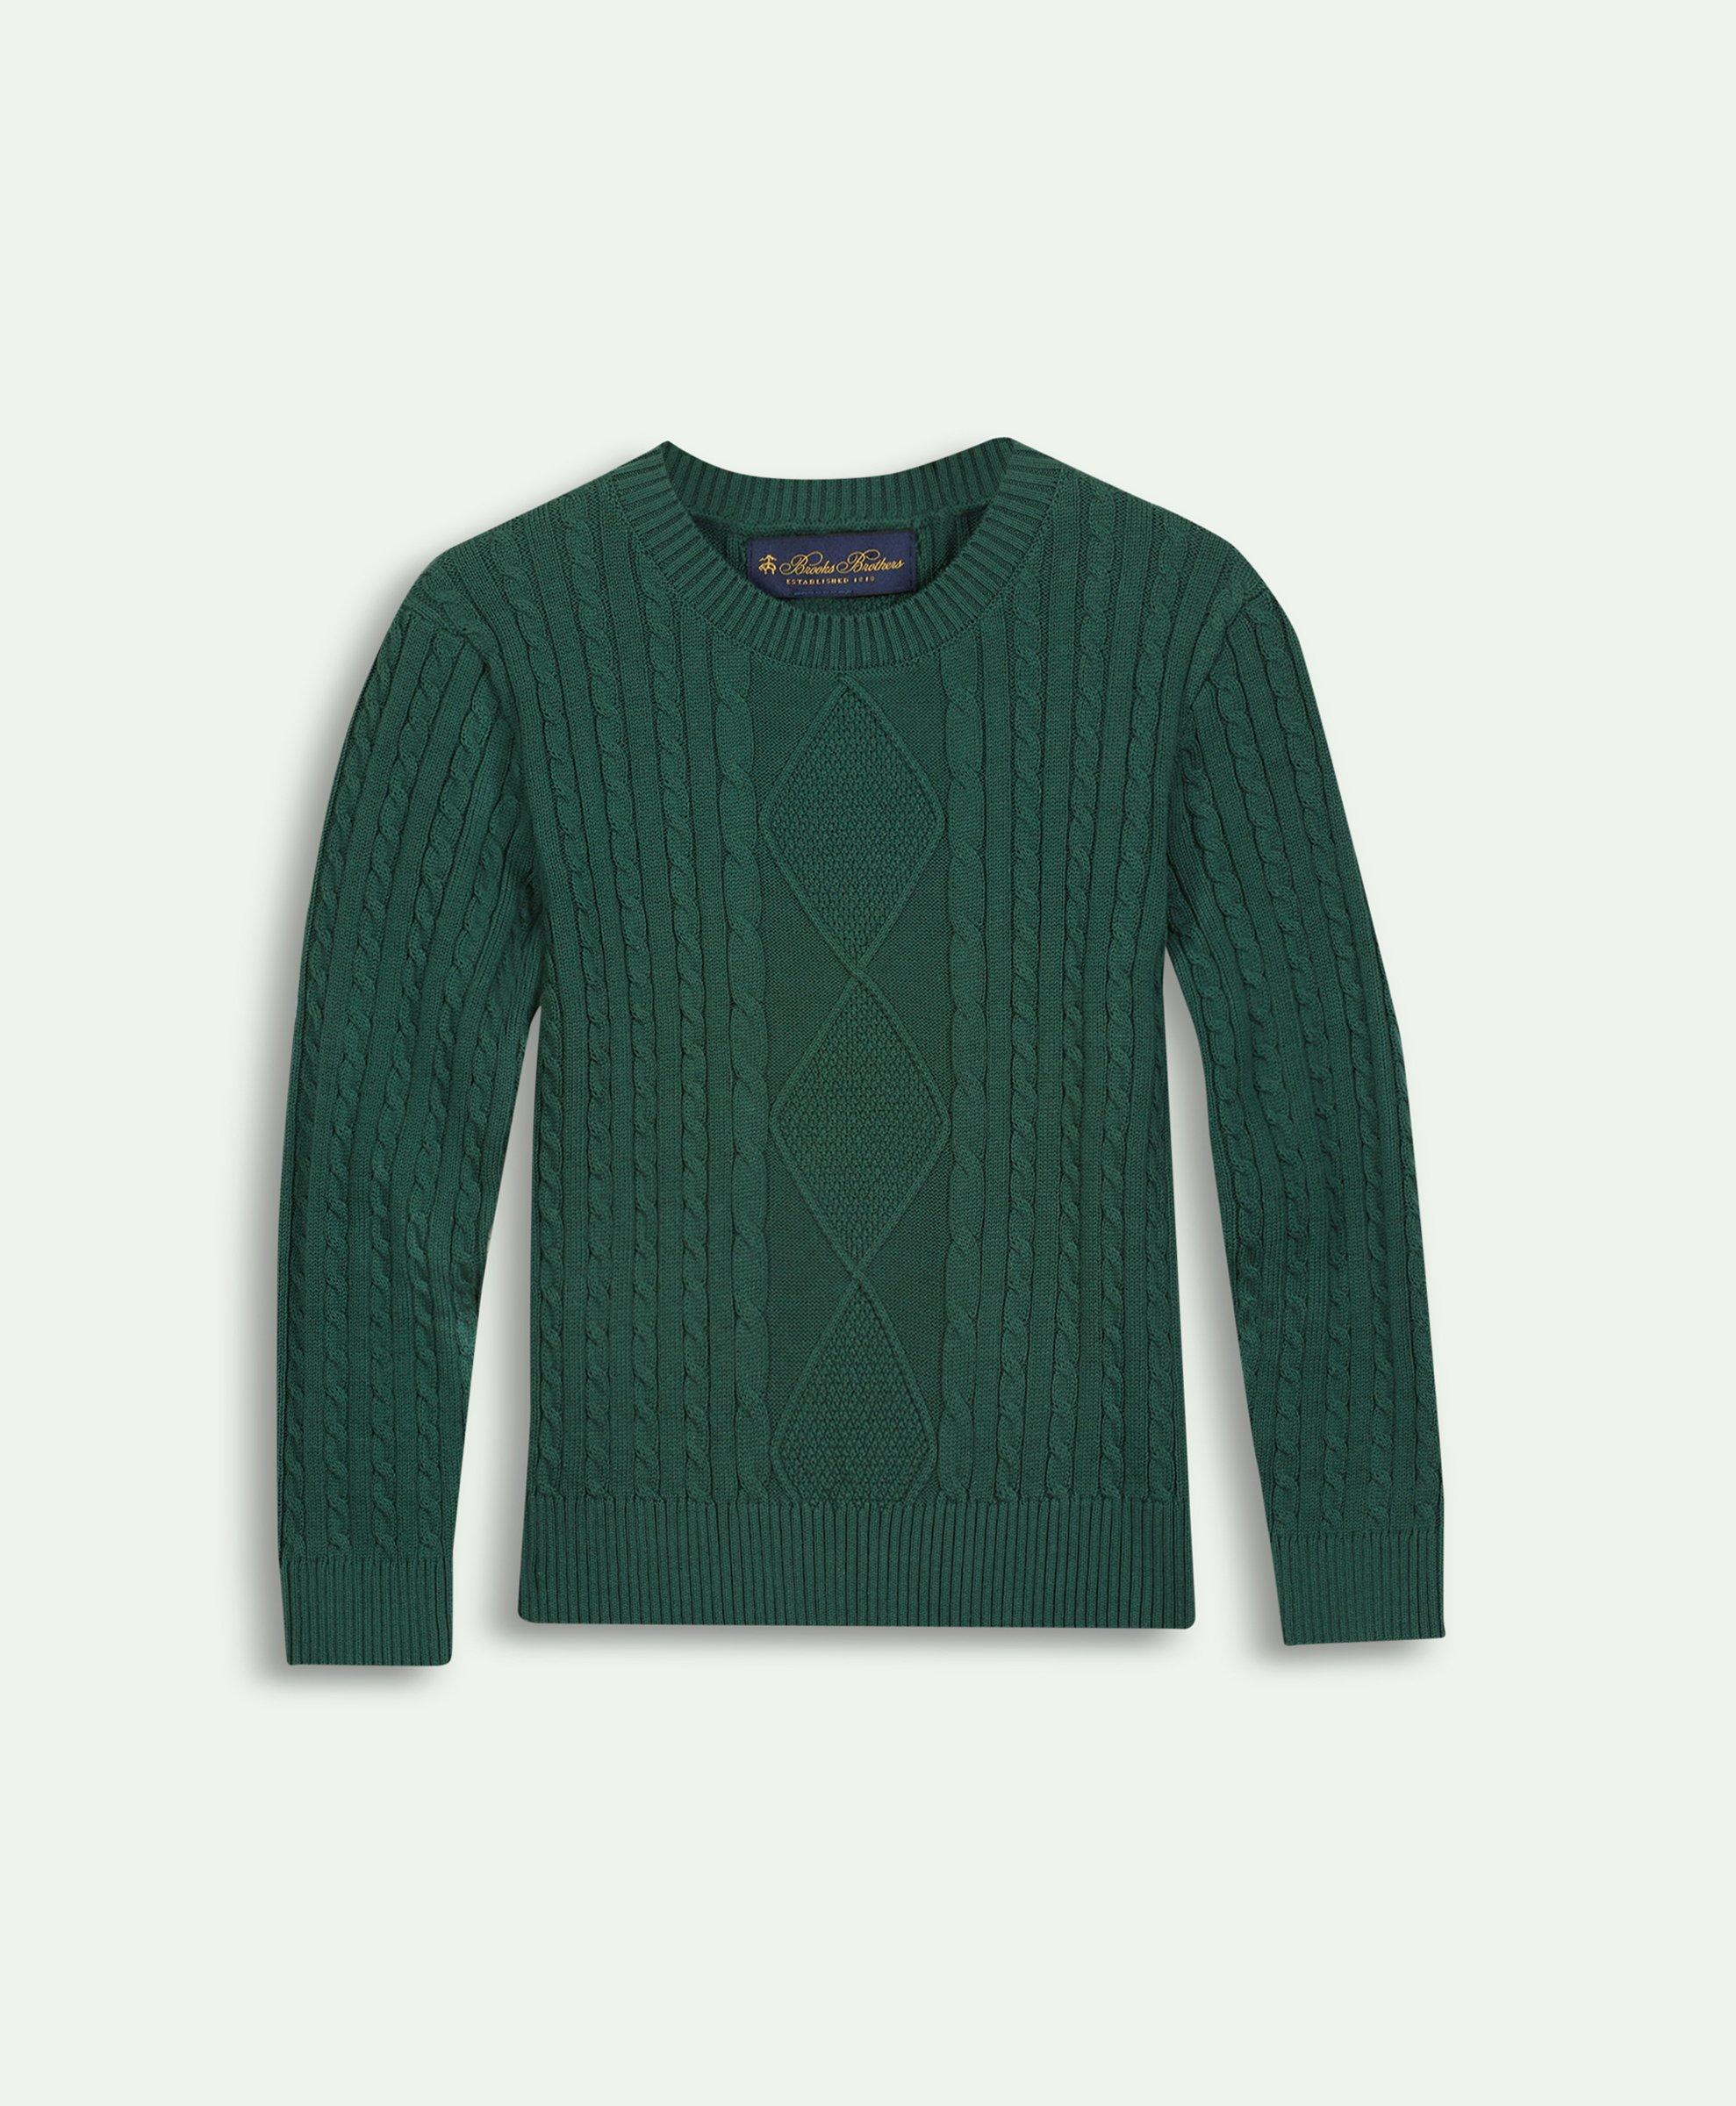 Brooks Brothers Kids'  Boys Cotton Cable Crewneck Sweater | Green | Size 8